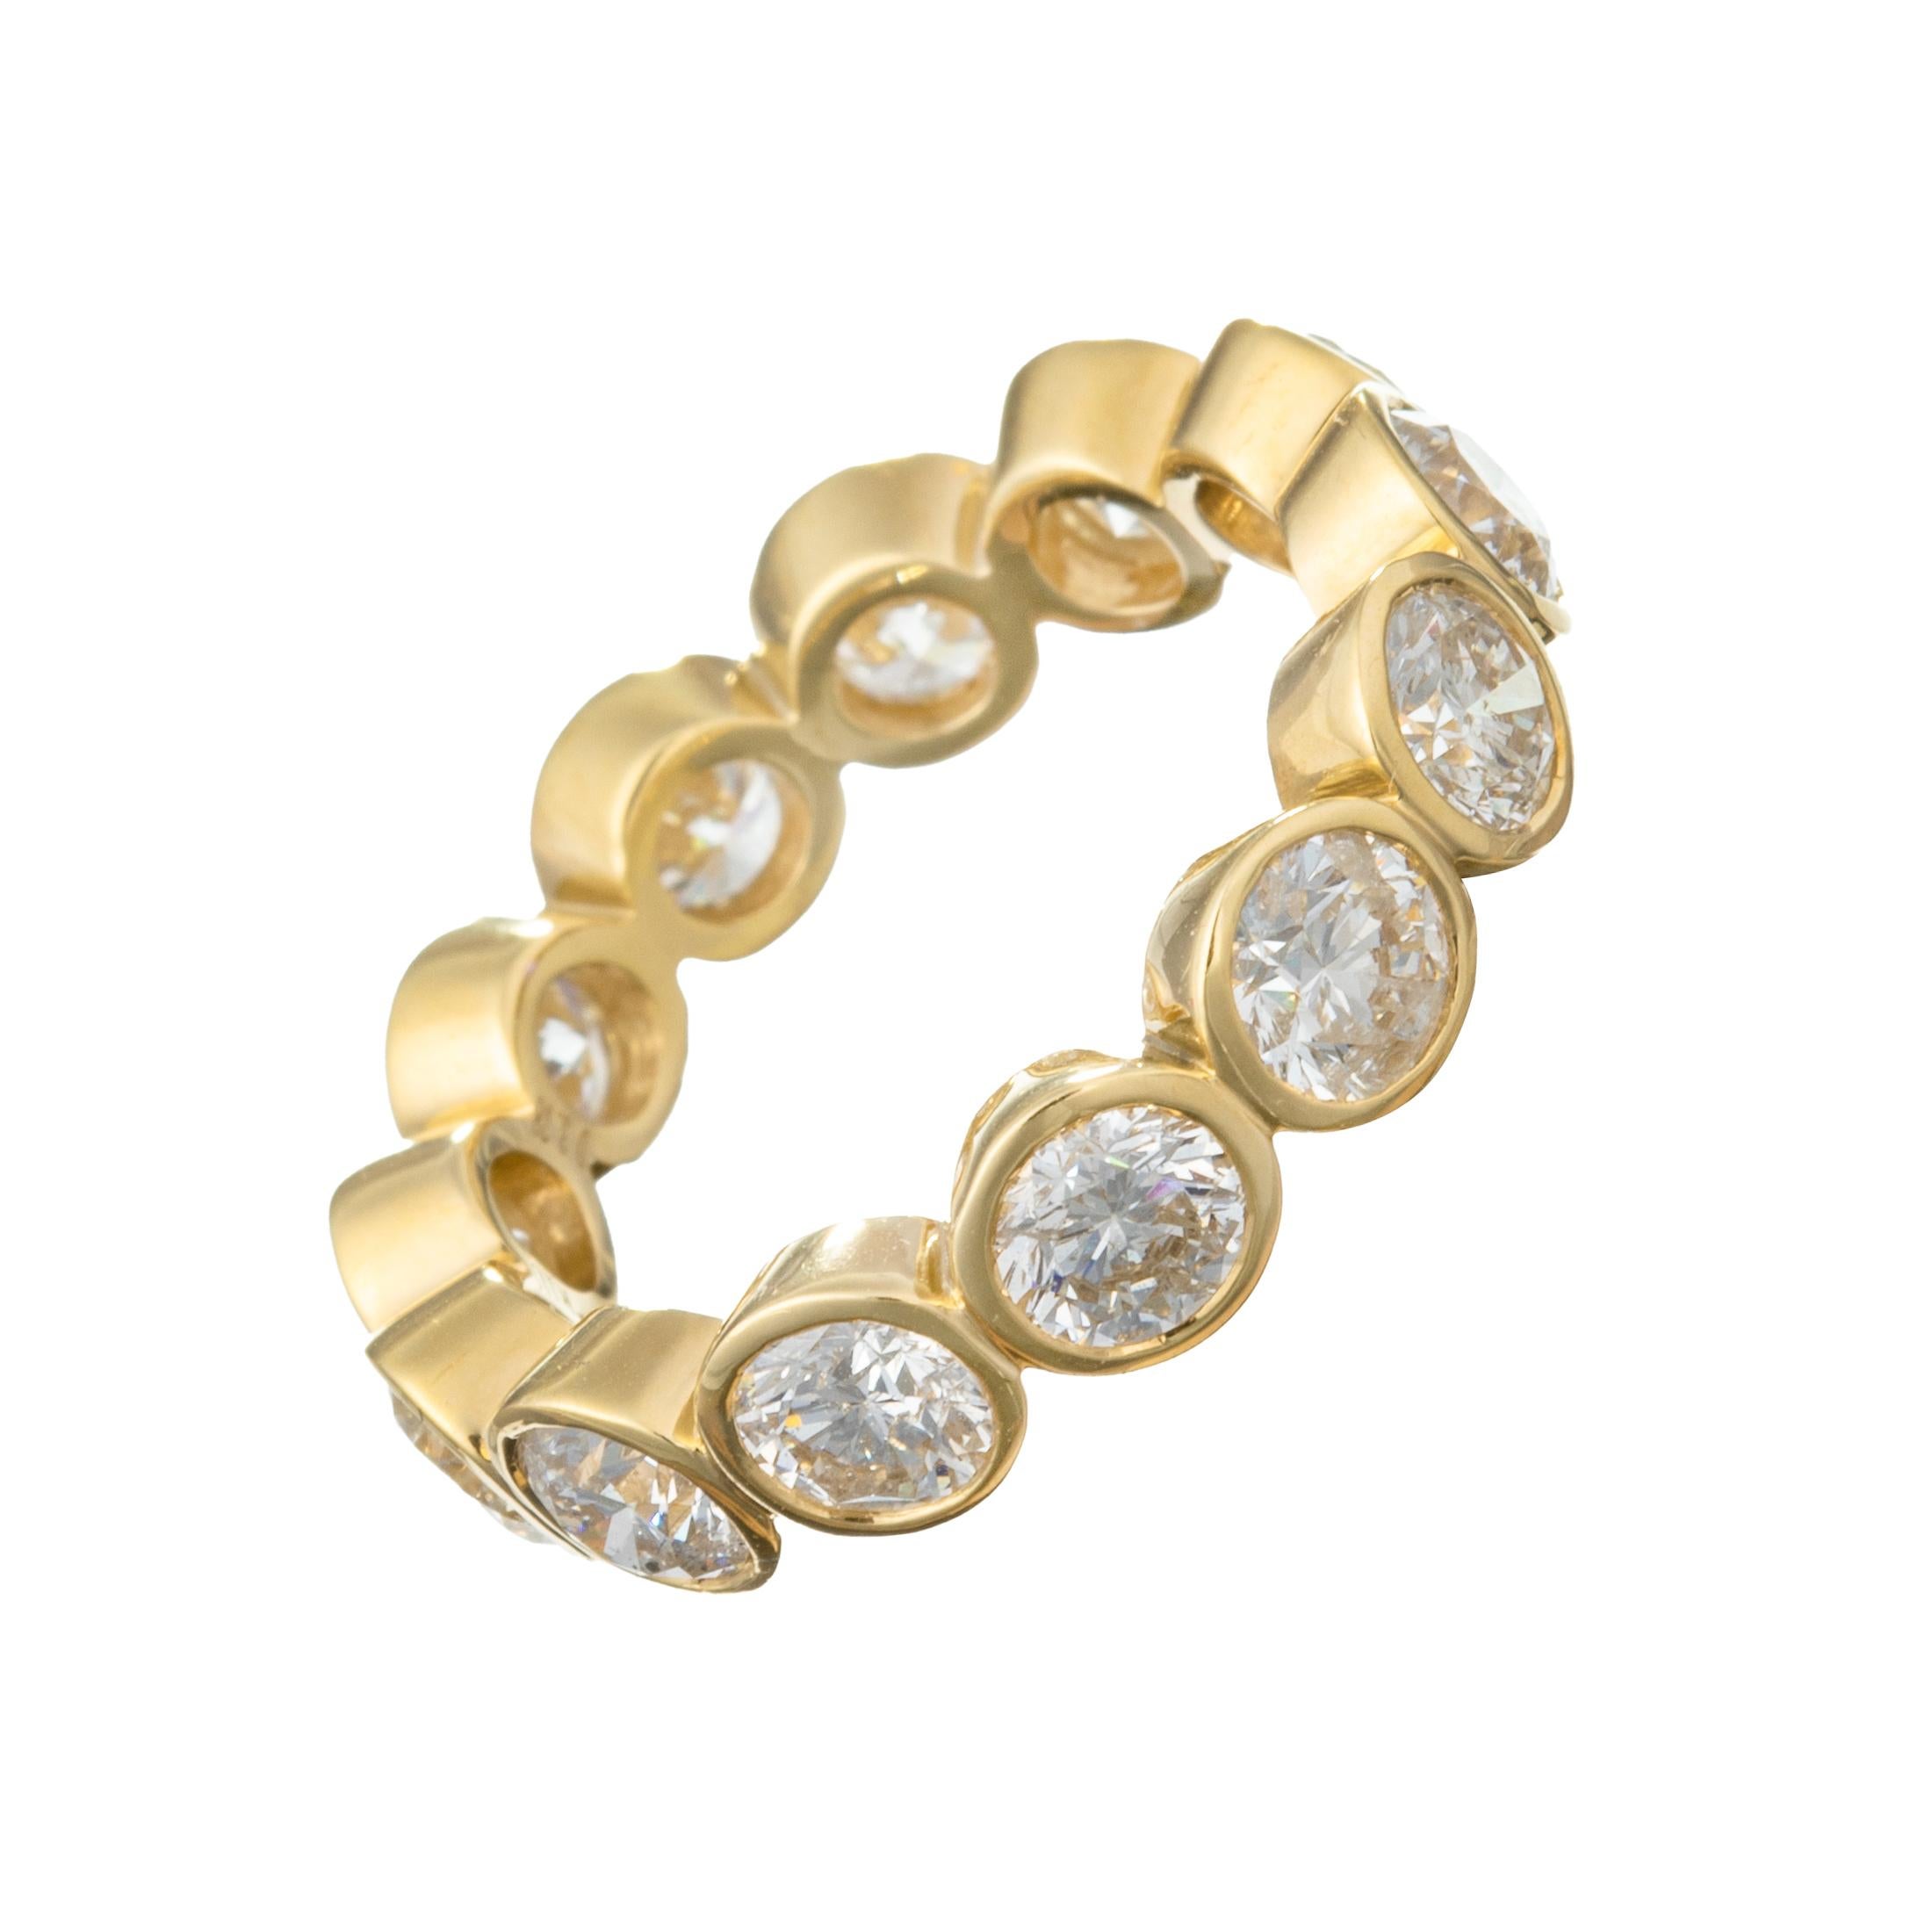 Eternity-style band ring handcrafted in high-polished 18k yellow gold.  Finely crafted with diamonds surrounding the entire band, each individually bezel-set with a gold rim around each diamond.  Thirteen diamonds weighing 3.78 total carats.  Size